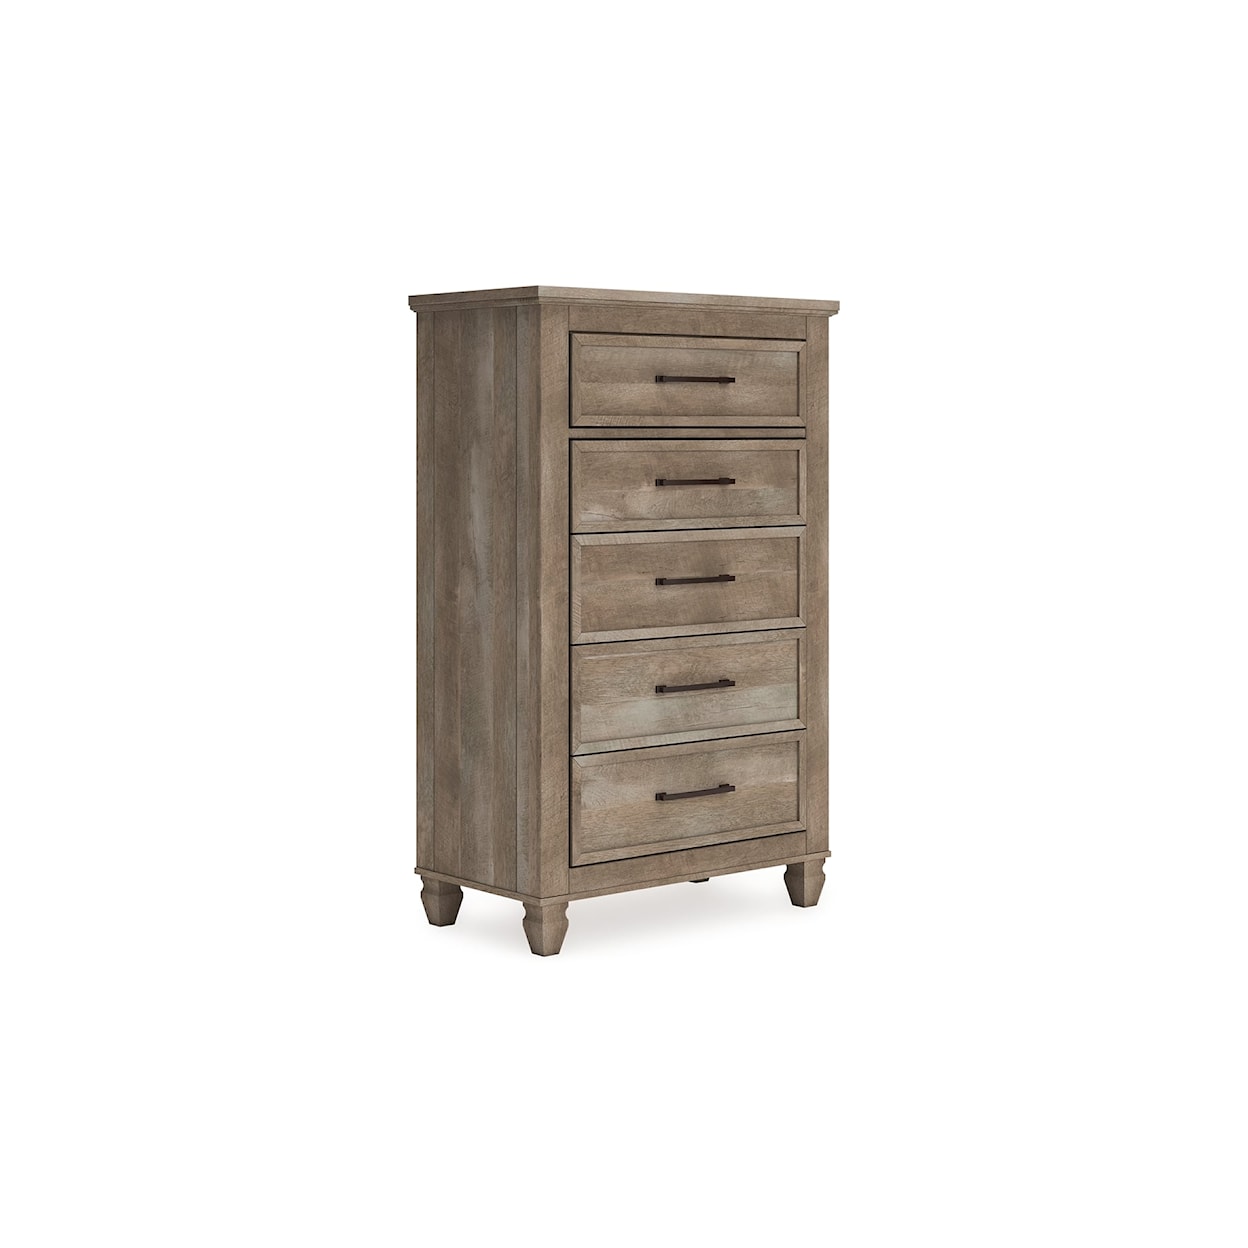 Ashley Furniture Signature Design Yarbeck Bedroom Chest